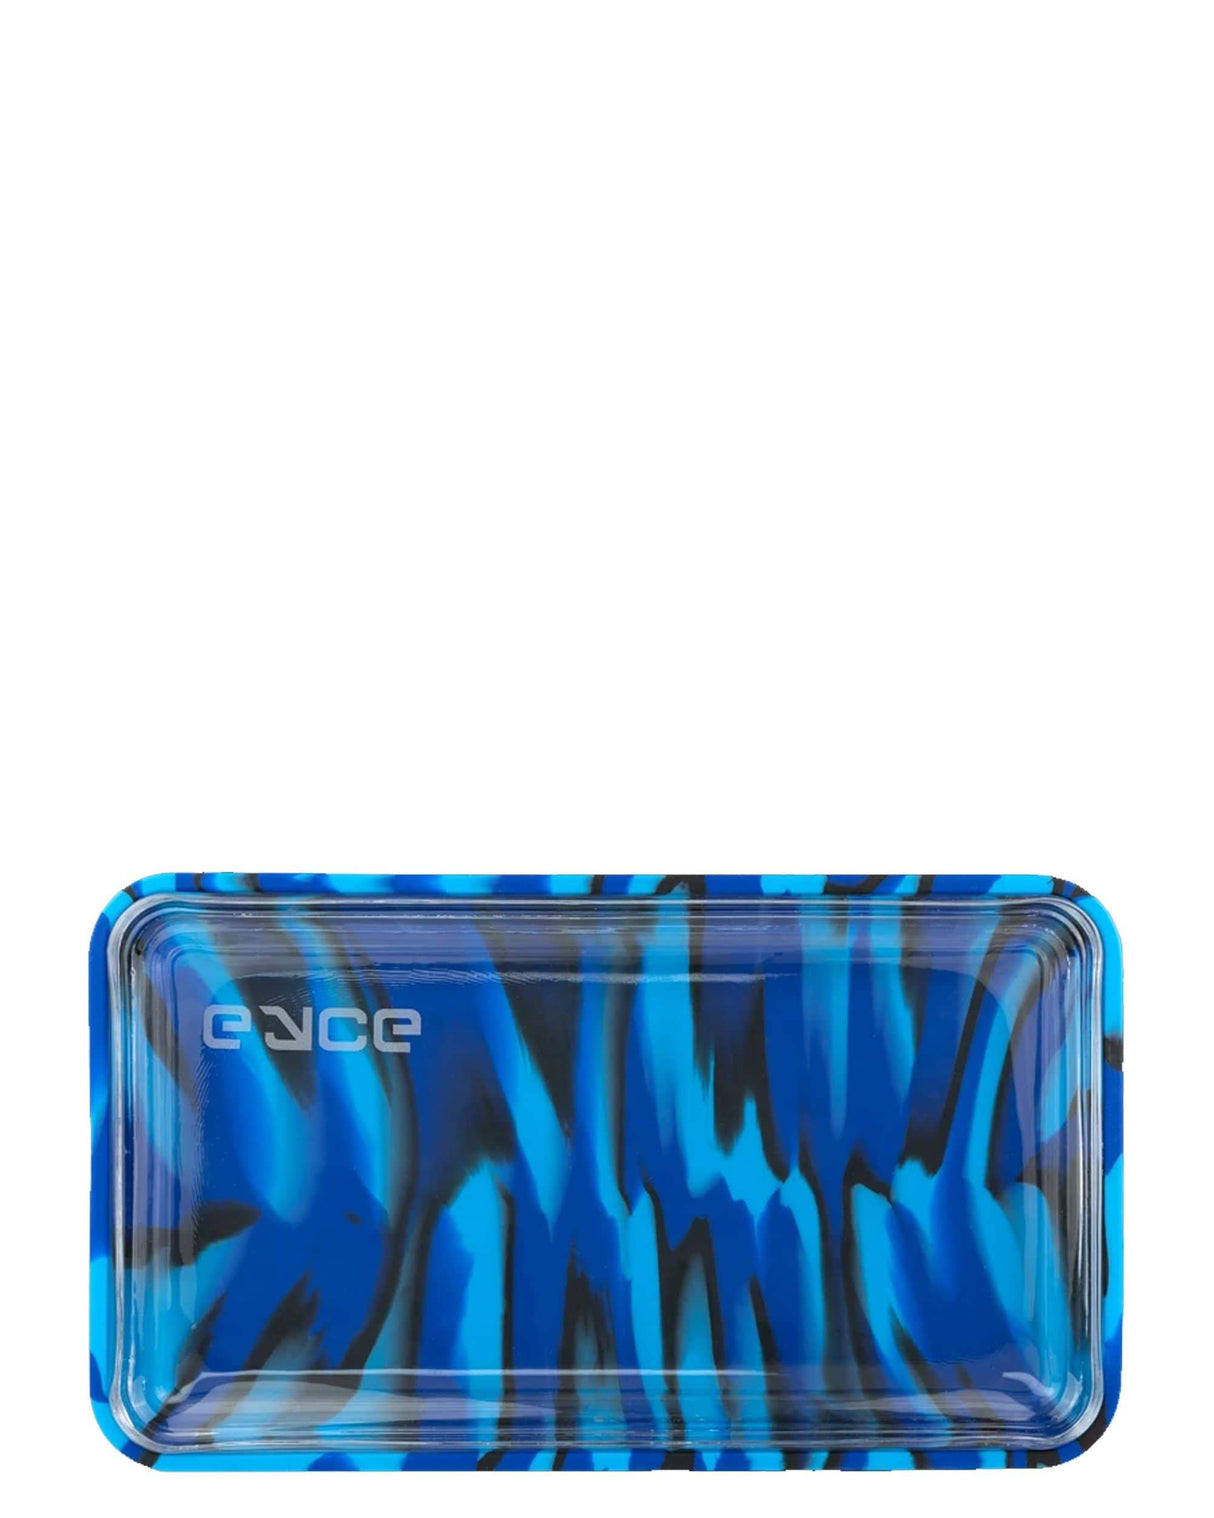 Eyce Silicone 2 in 1 Rolling Tray in Blue Tiger Stripe Design, Front View